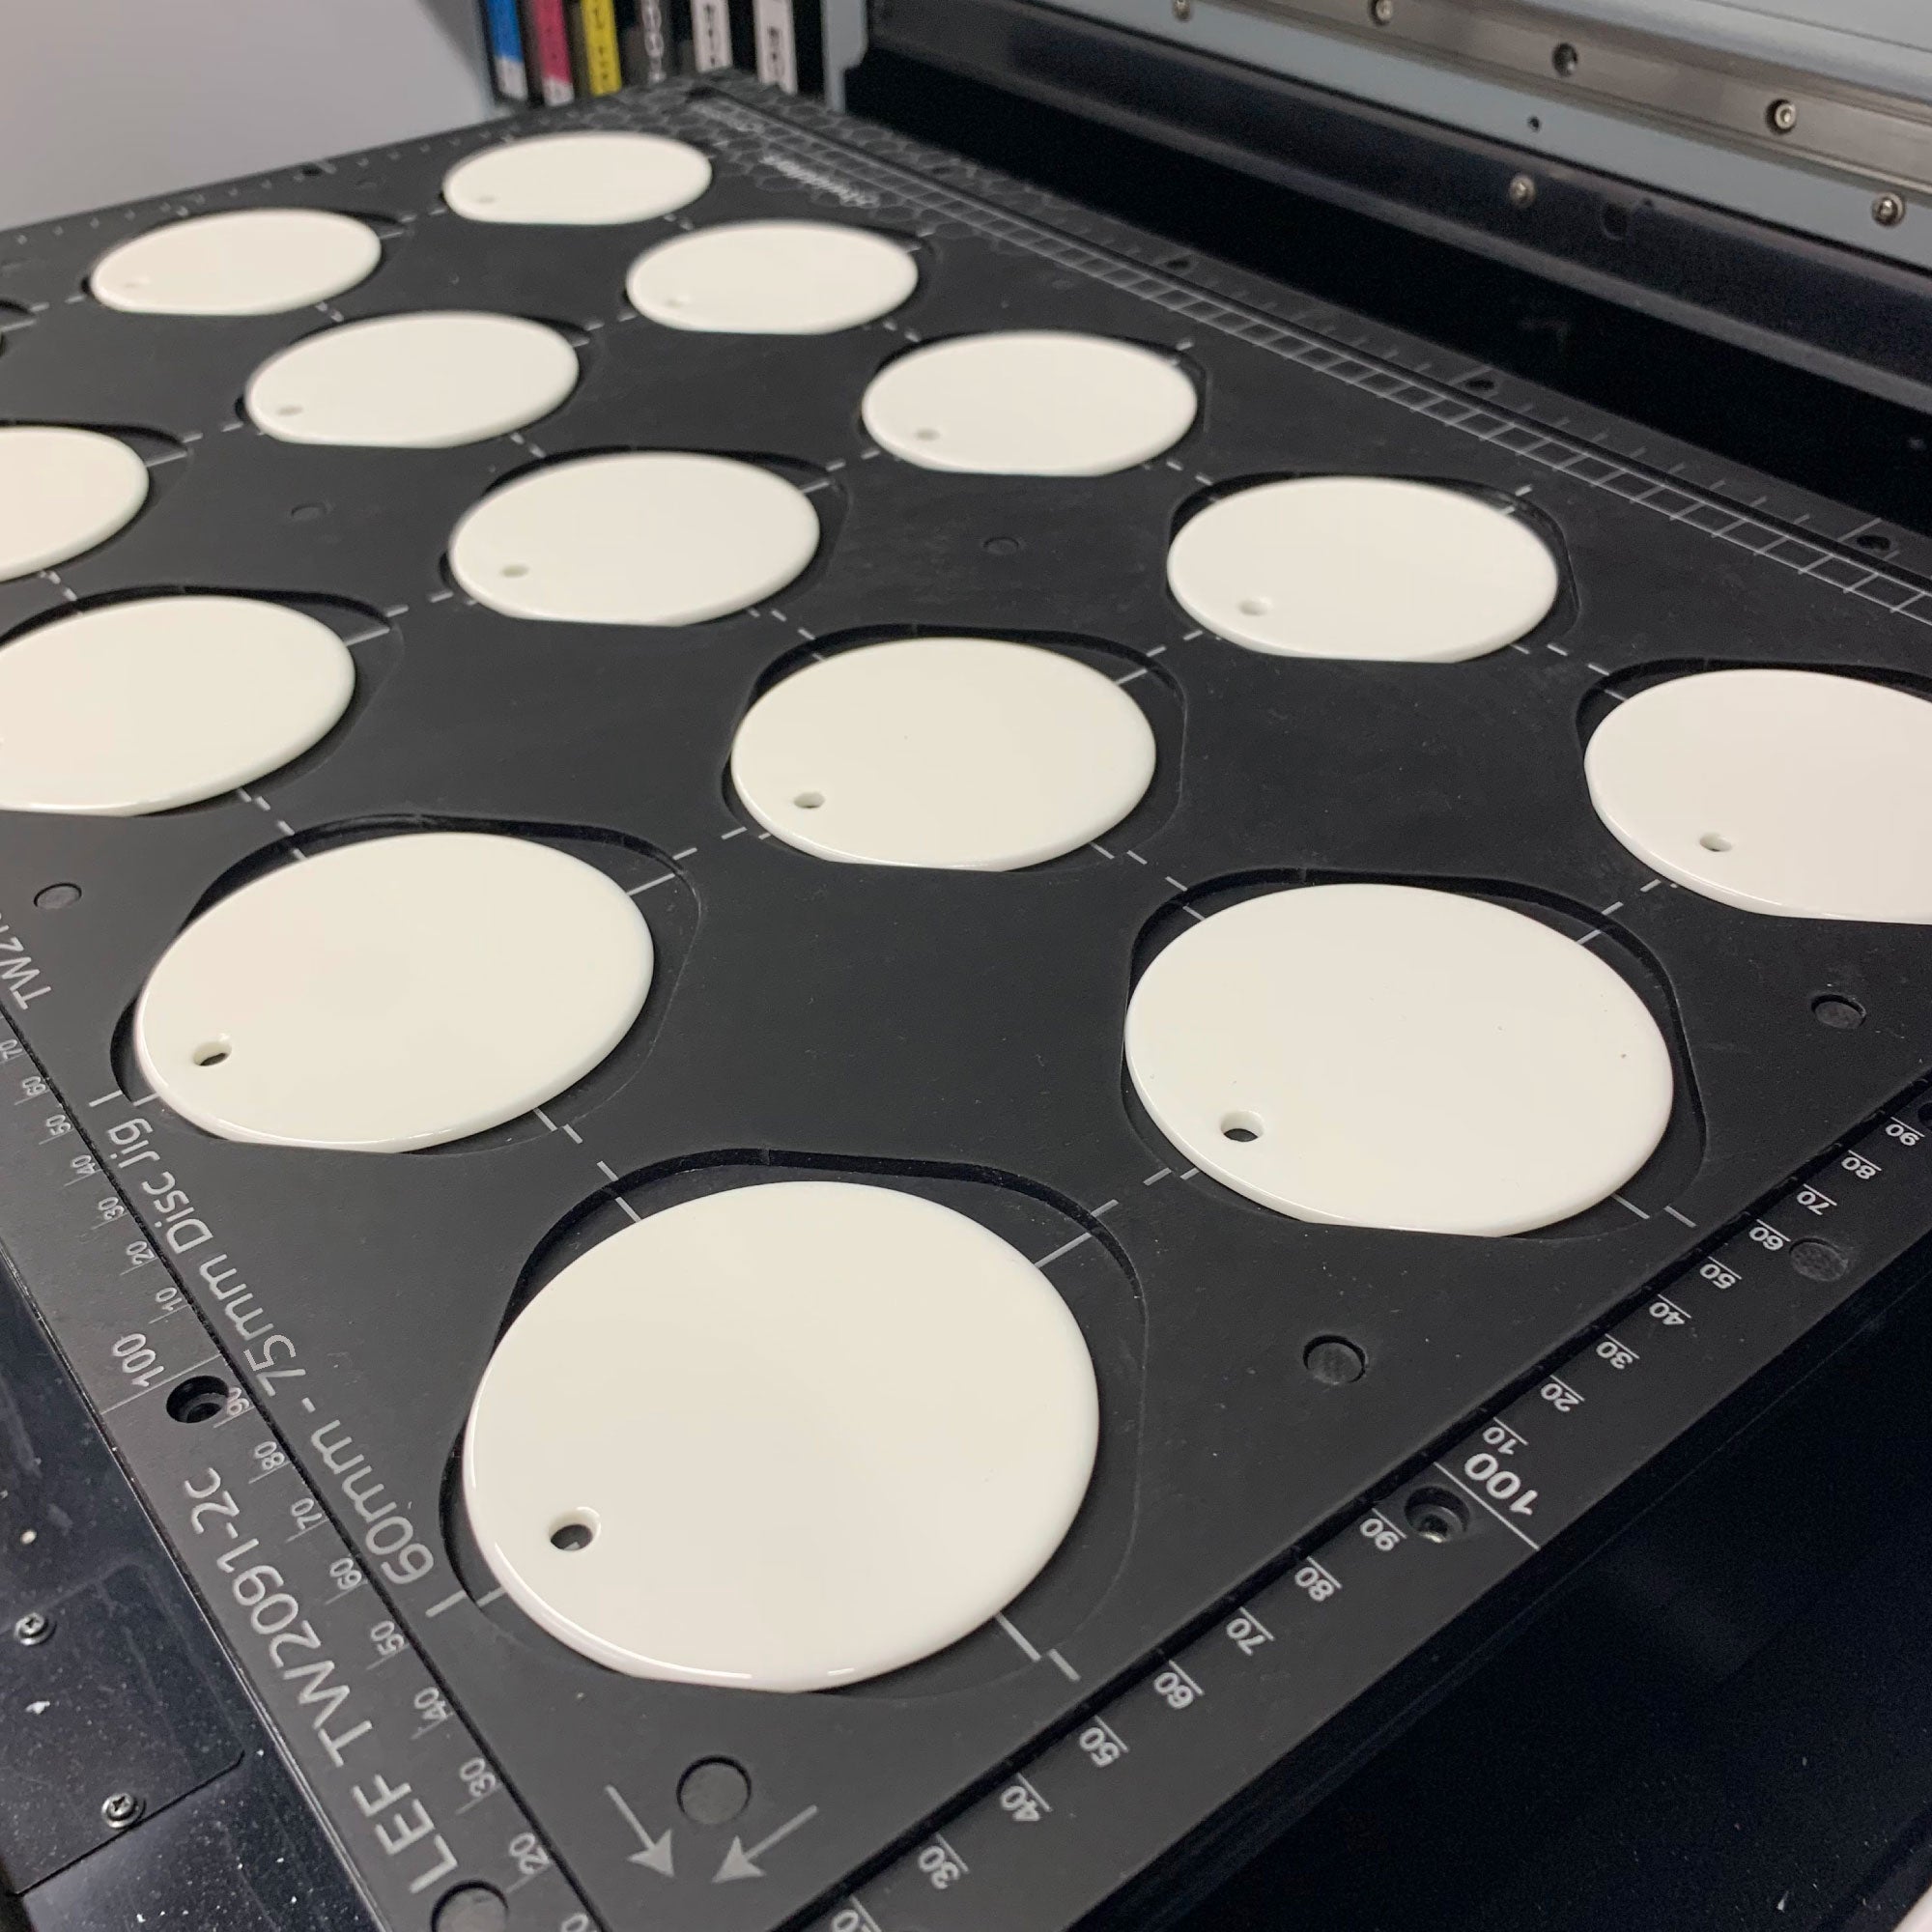 Ceramic Christmas Bauble Printing Jig for Roland LEF 12 Flatbed Printer Series: 60mm - 77mm Circular Discs (6 Spaces)